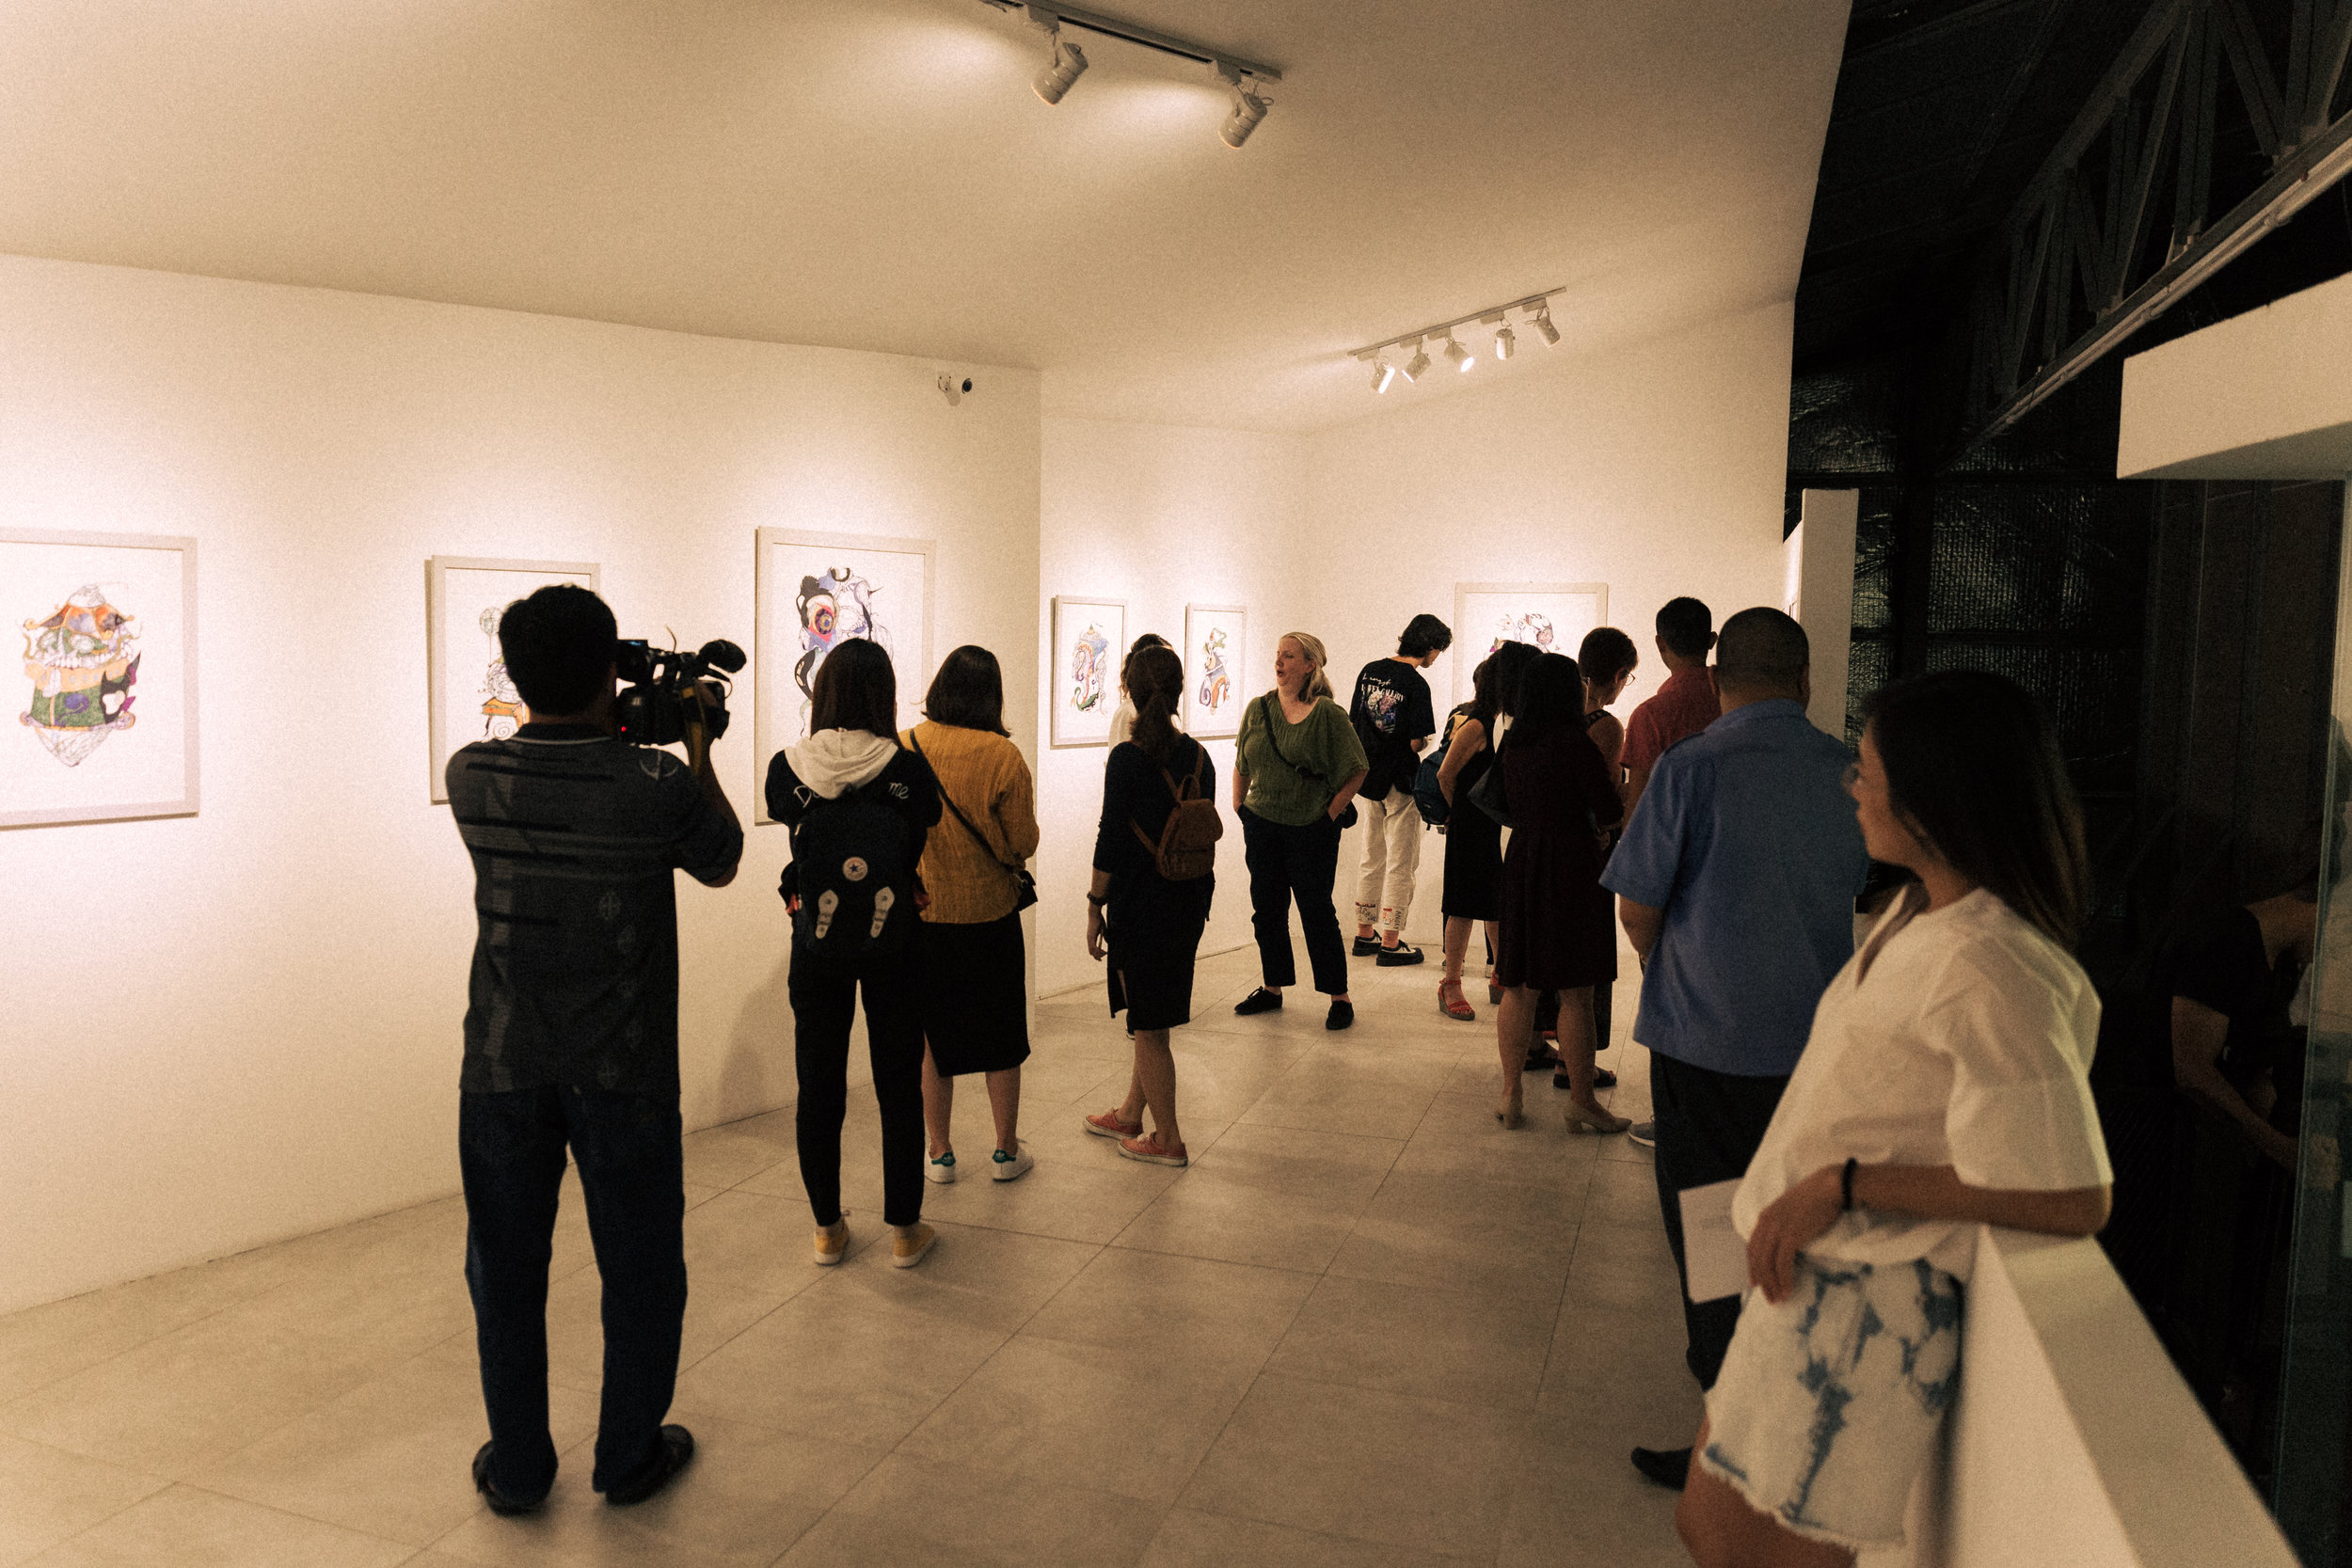  Reception of ‘lamina | ink’ on September 28th, 2018 at The Factory Contemporary Arts Centre 